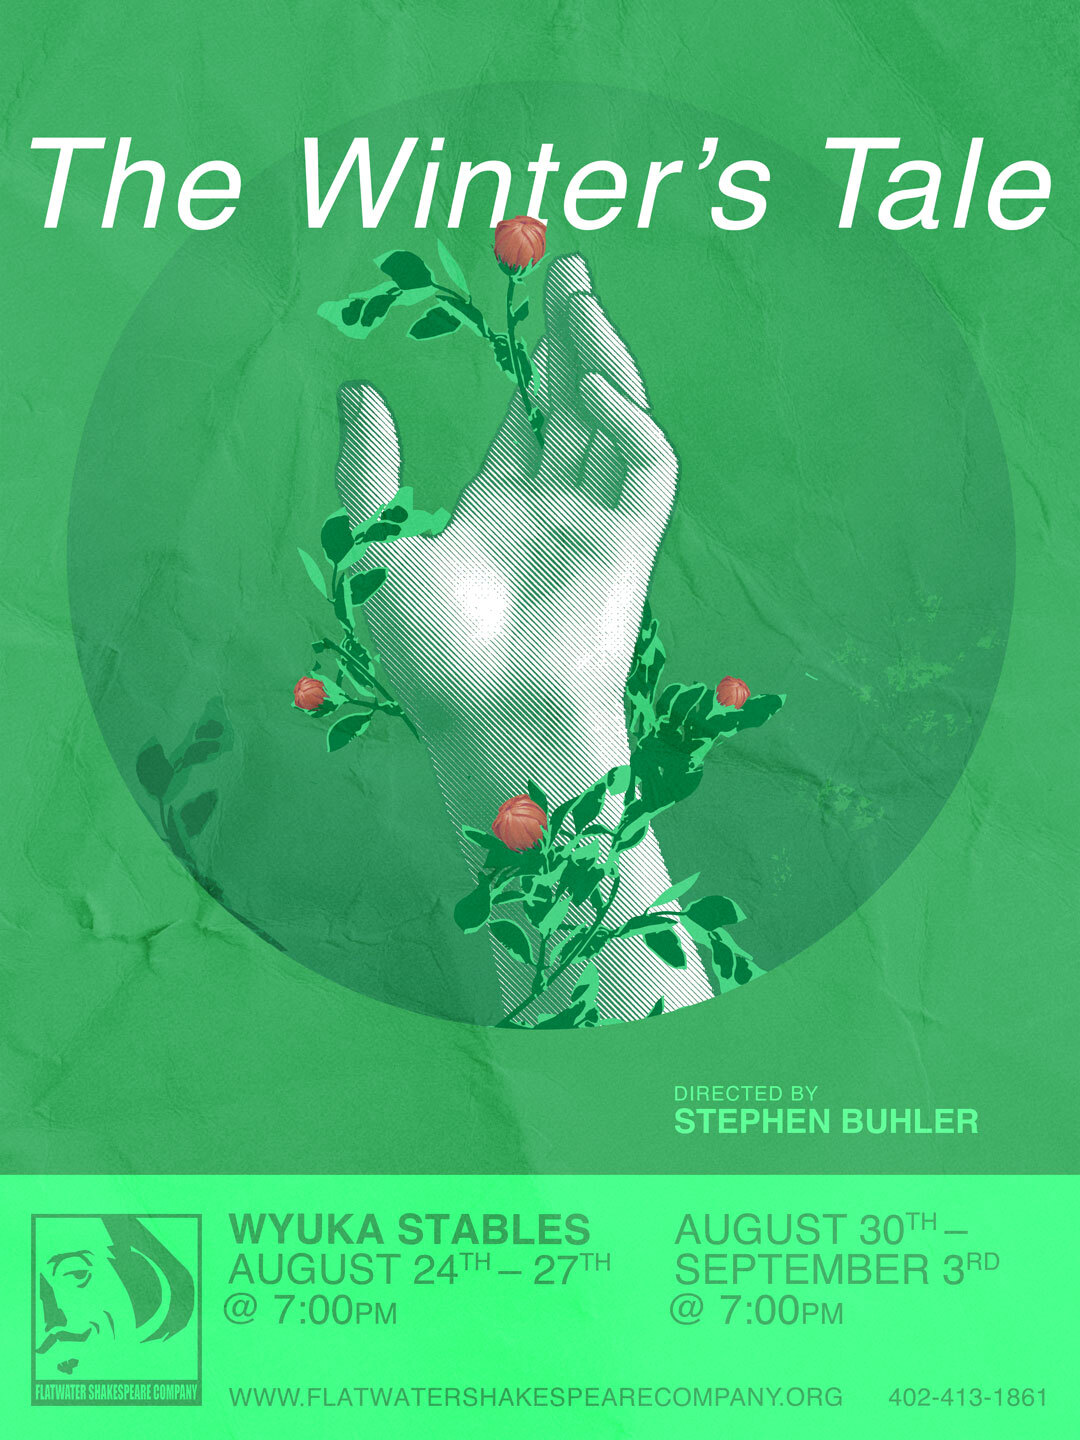 9/2 KID - KIDS (10 and Under): Sat. September 2, 2023 | 7:00 p.m. - 10:00 p.m. CST | Wyuka Stables (The Winter's Tale)